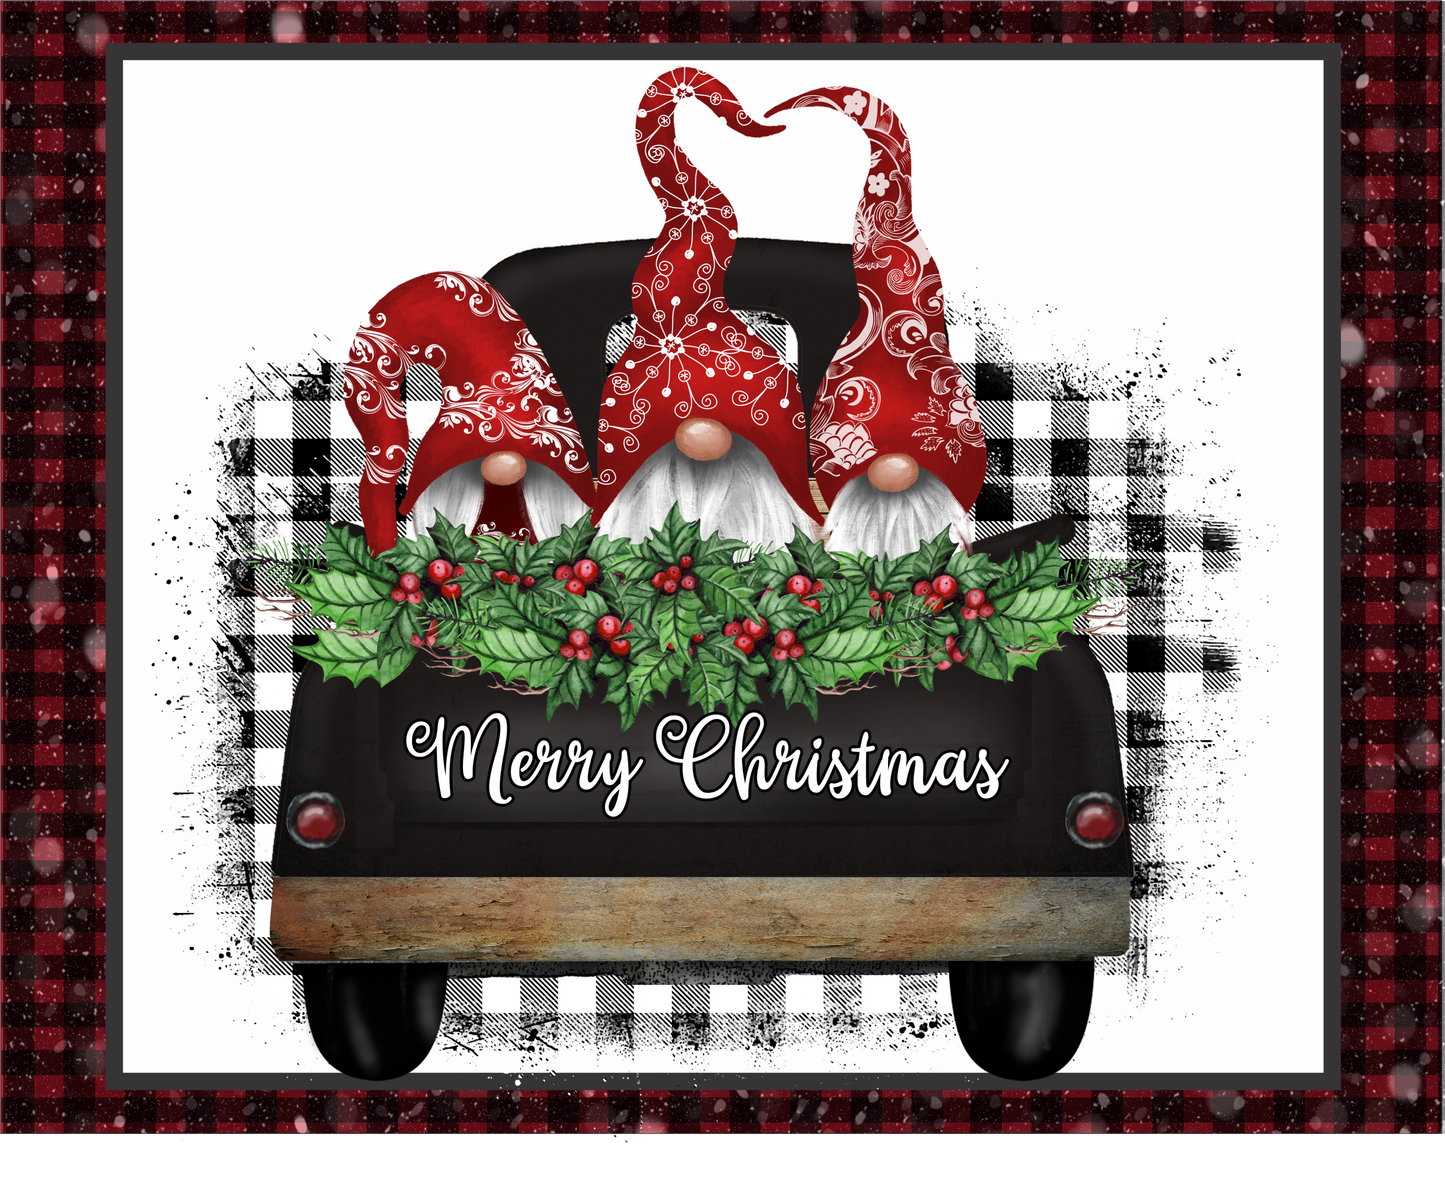 Merry Christmas Red, White and Black with Gnomes in Truck sign